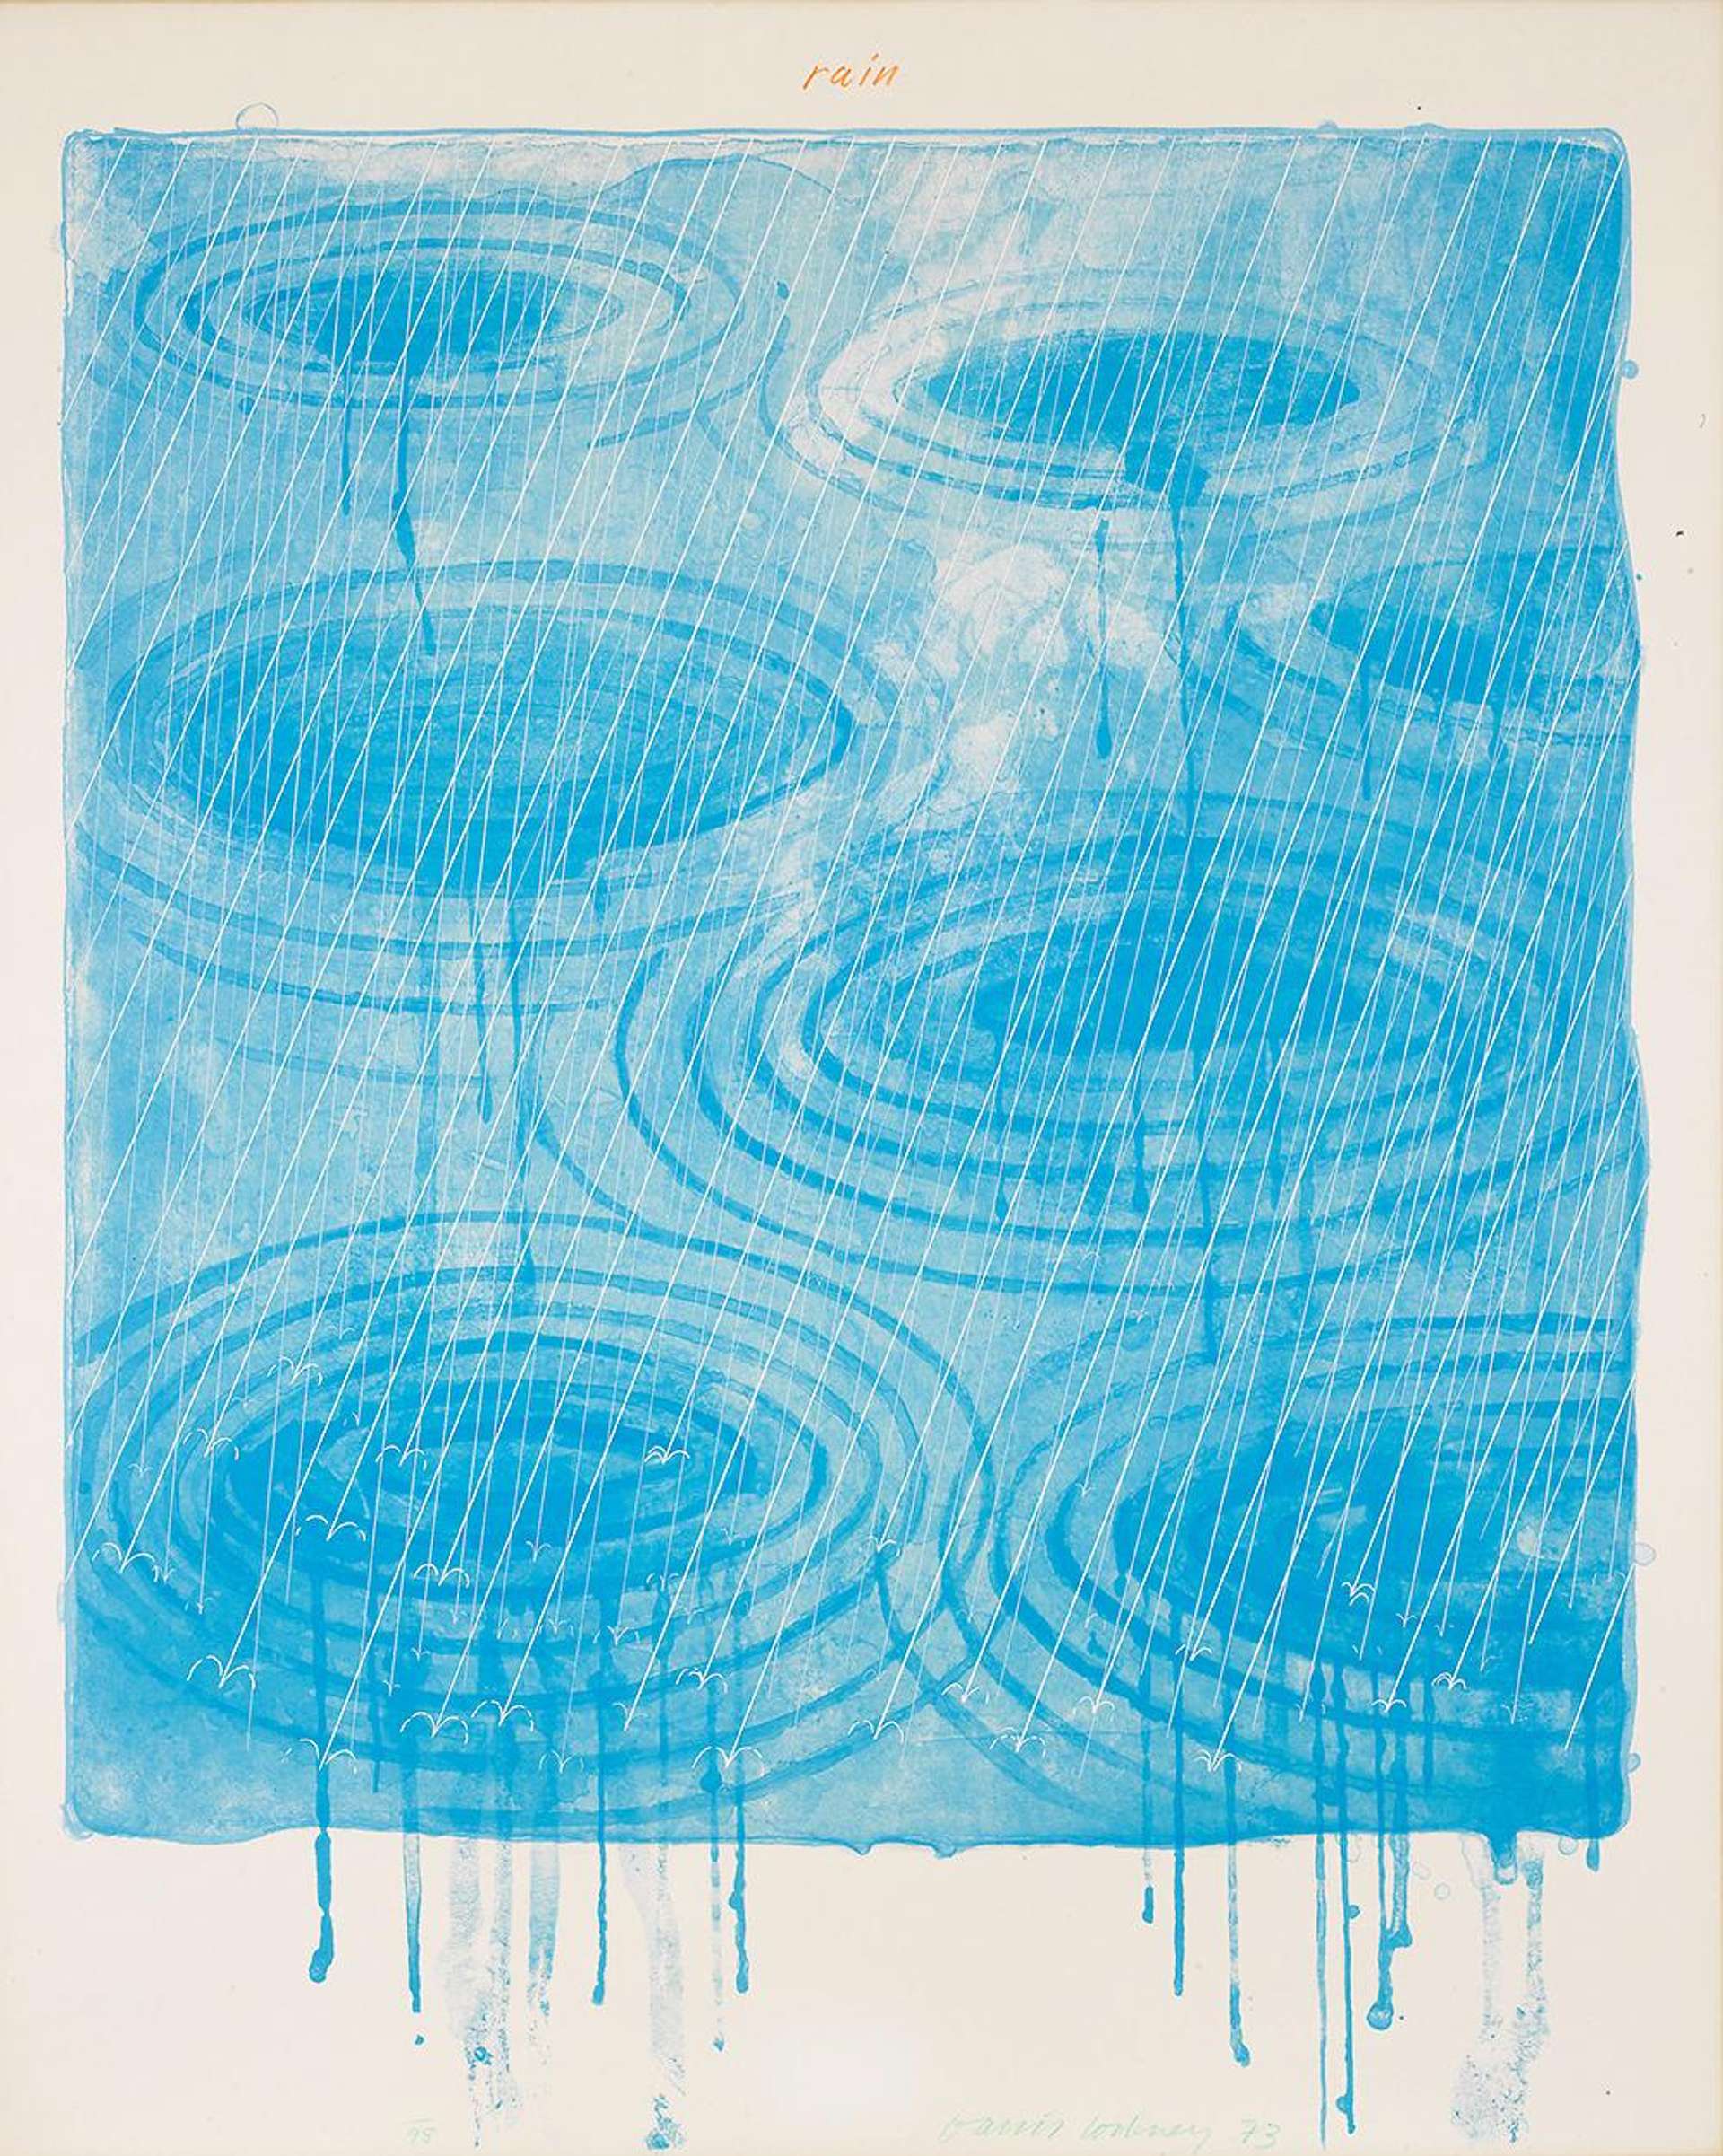 David Hockney's Rain. A lithographic print of a puddle of water with heavy drops of rain falling into them. 